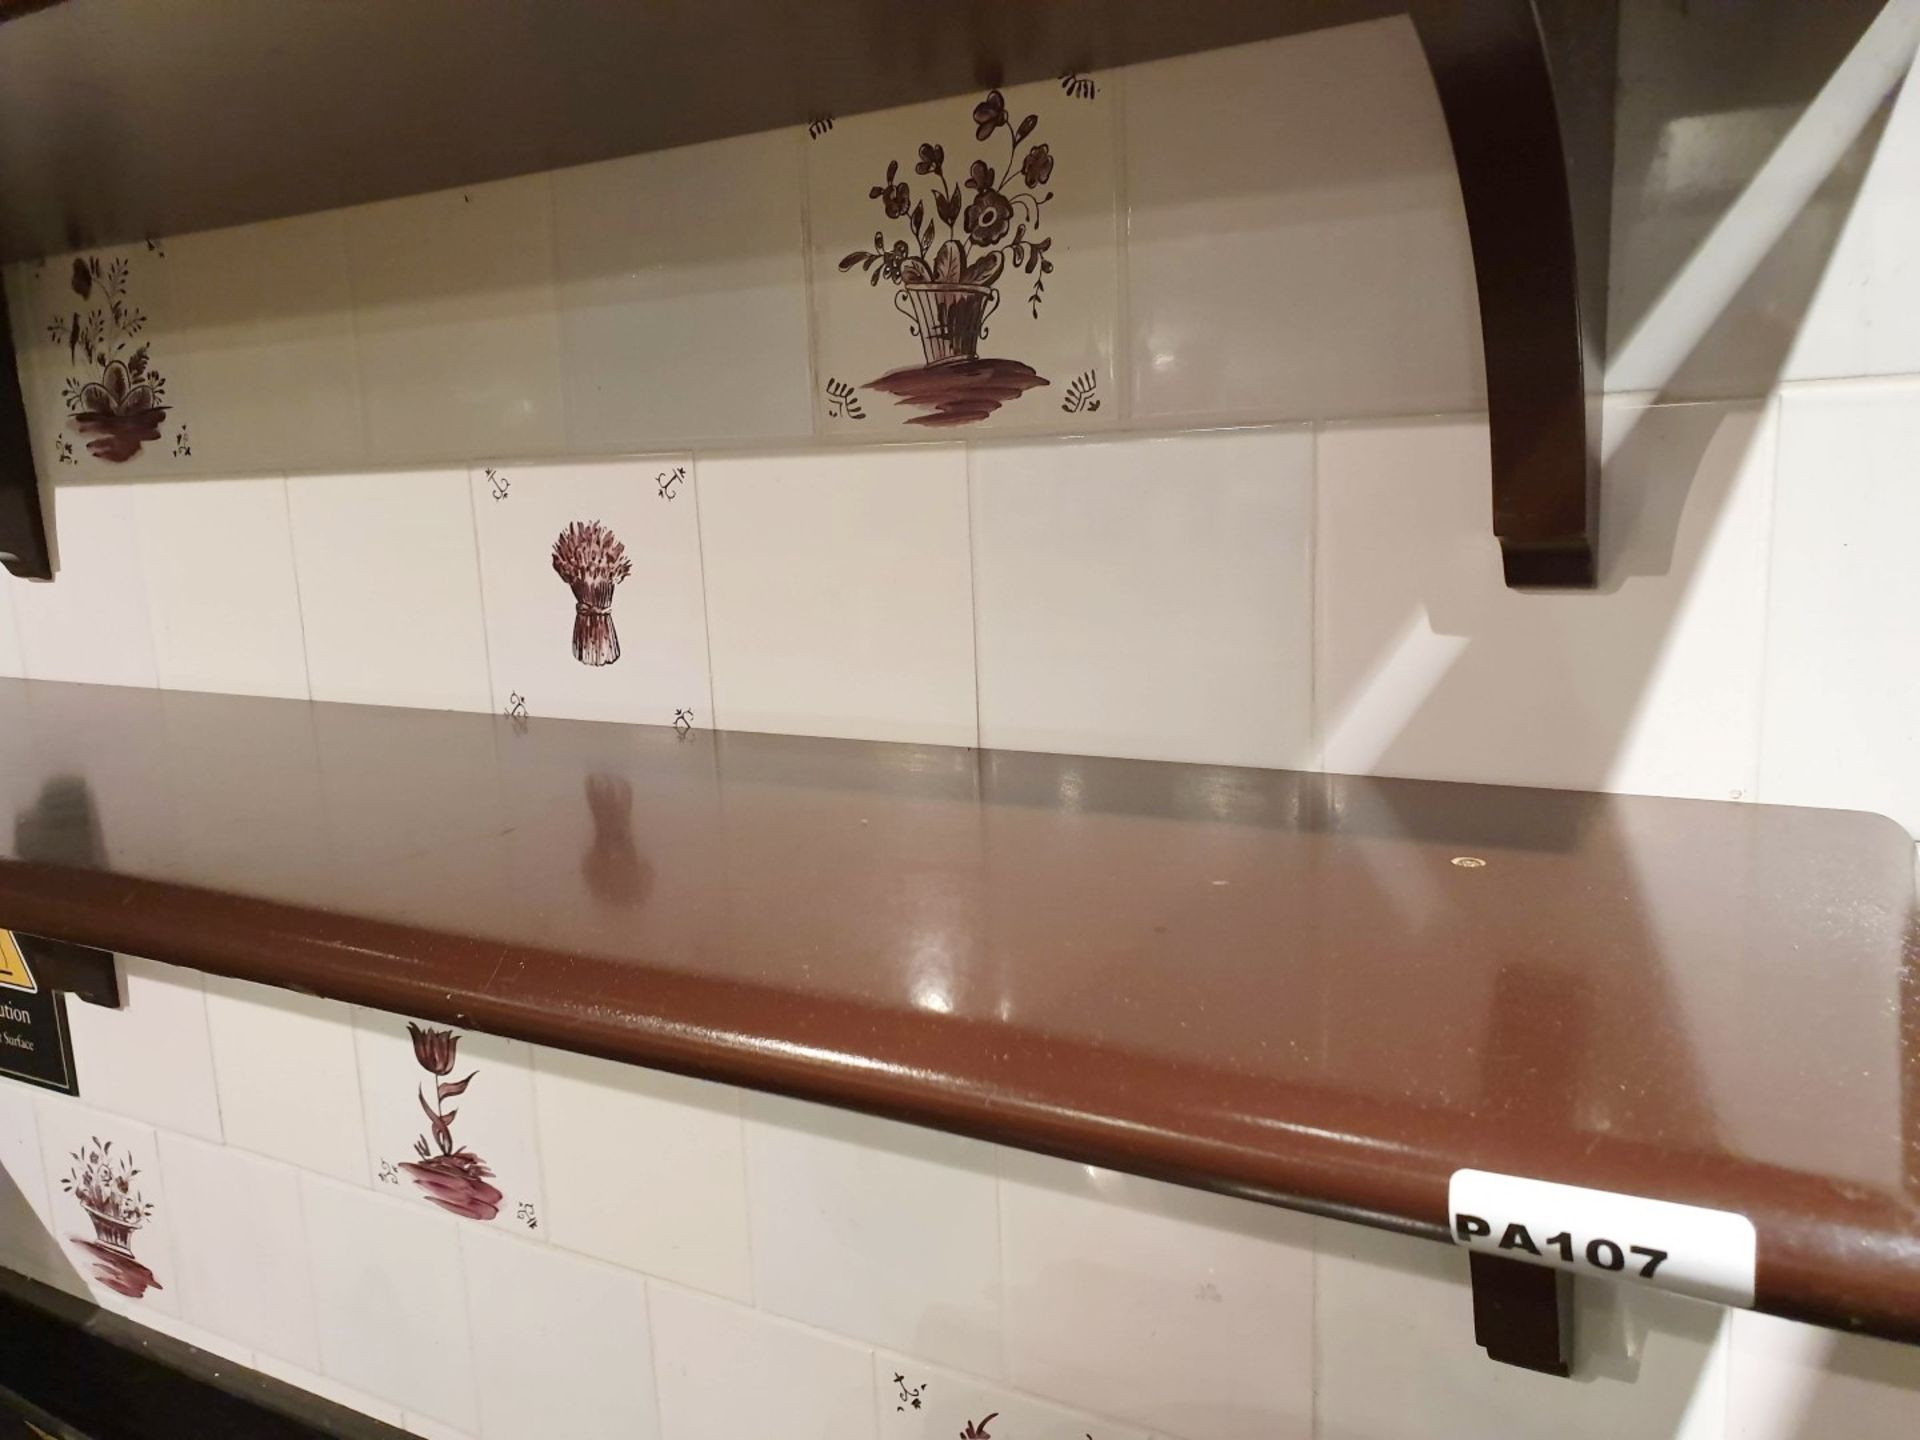 2 x Wall Mounted Wooden Shelves - W120 x D30 cms - Ref PA107 - CL463 - Location: Altrincham WA14 - Image 2 of 3